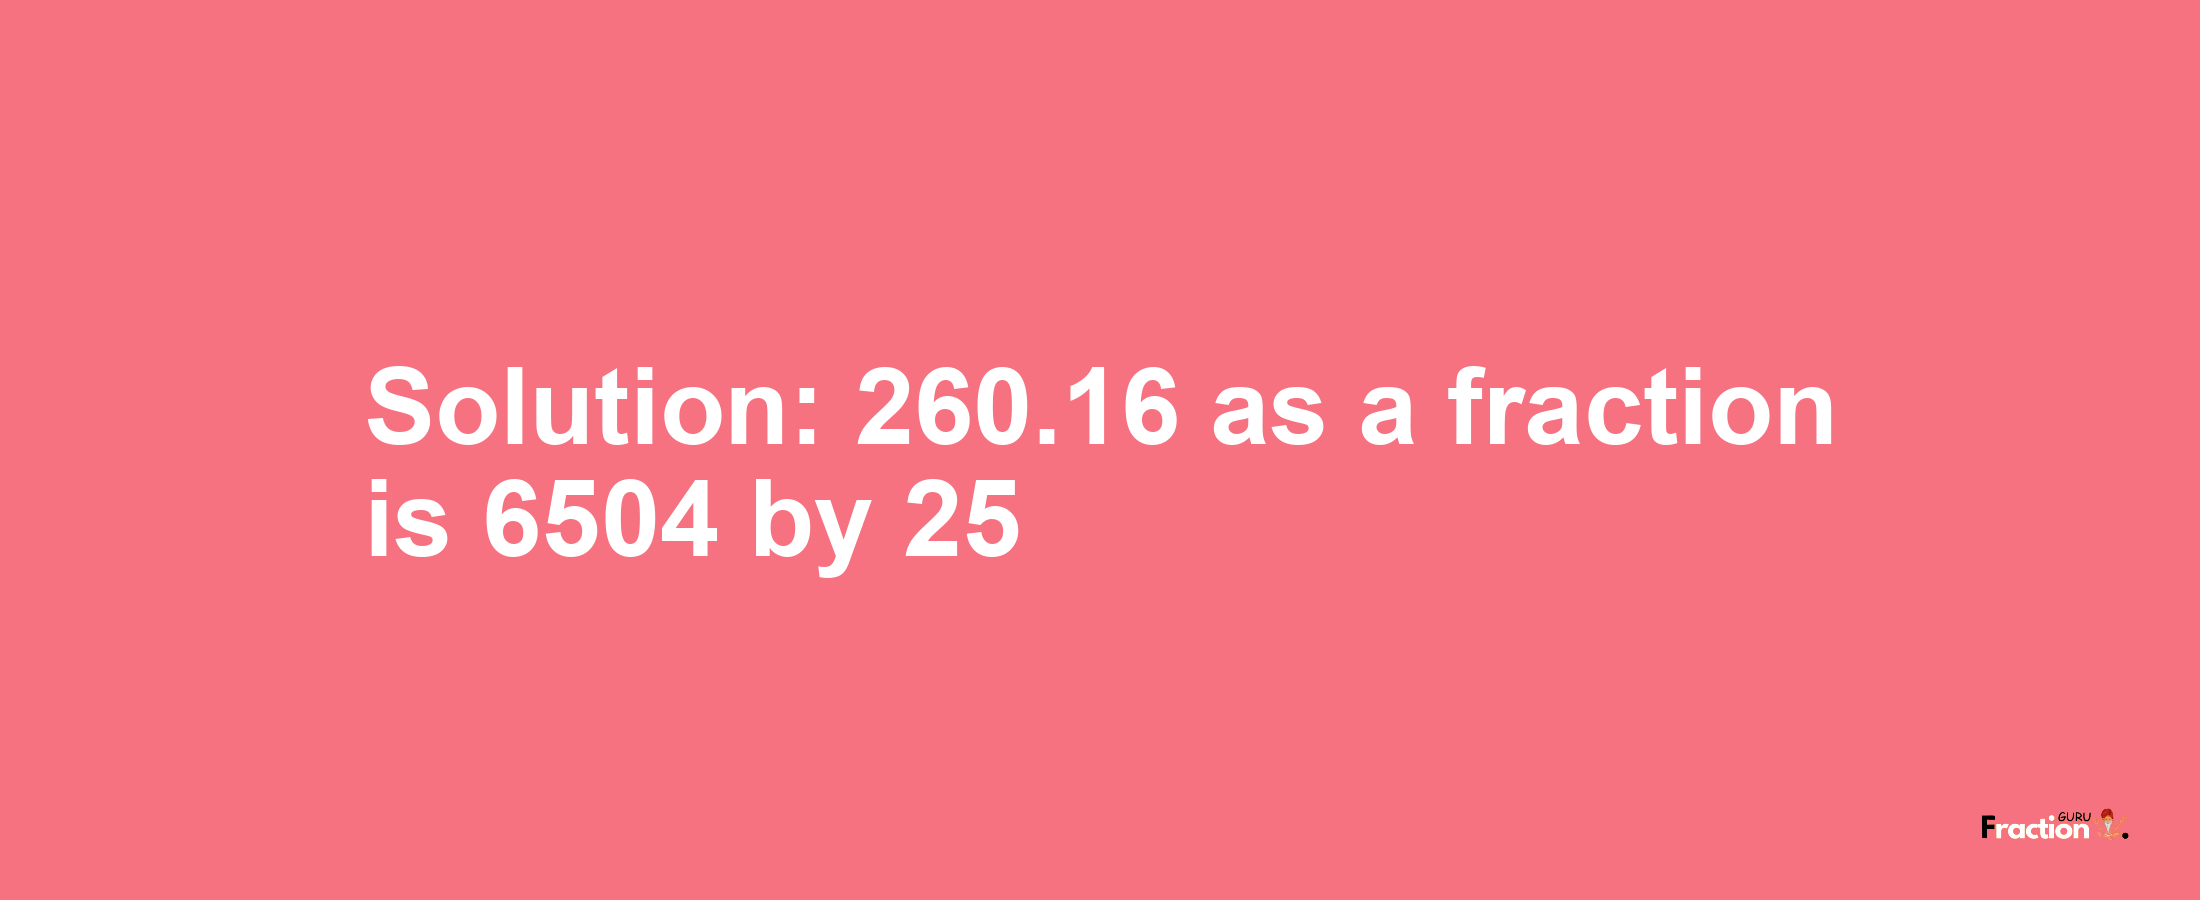 Solution:260.16 as a fraction is 6504/25